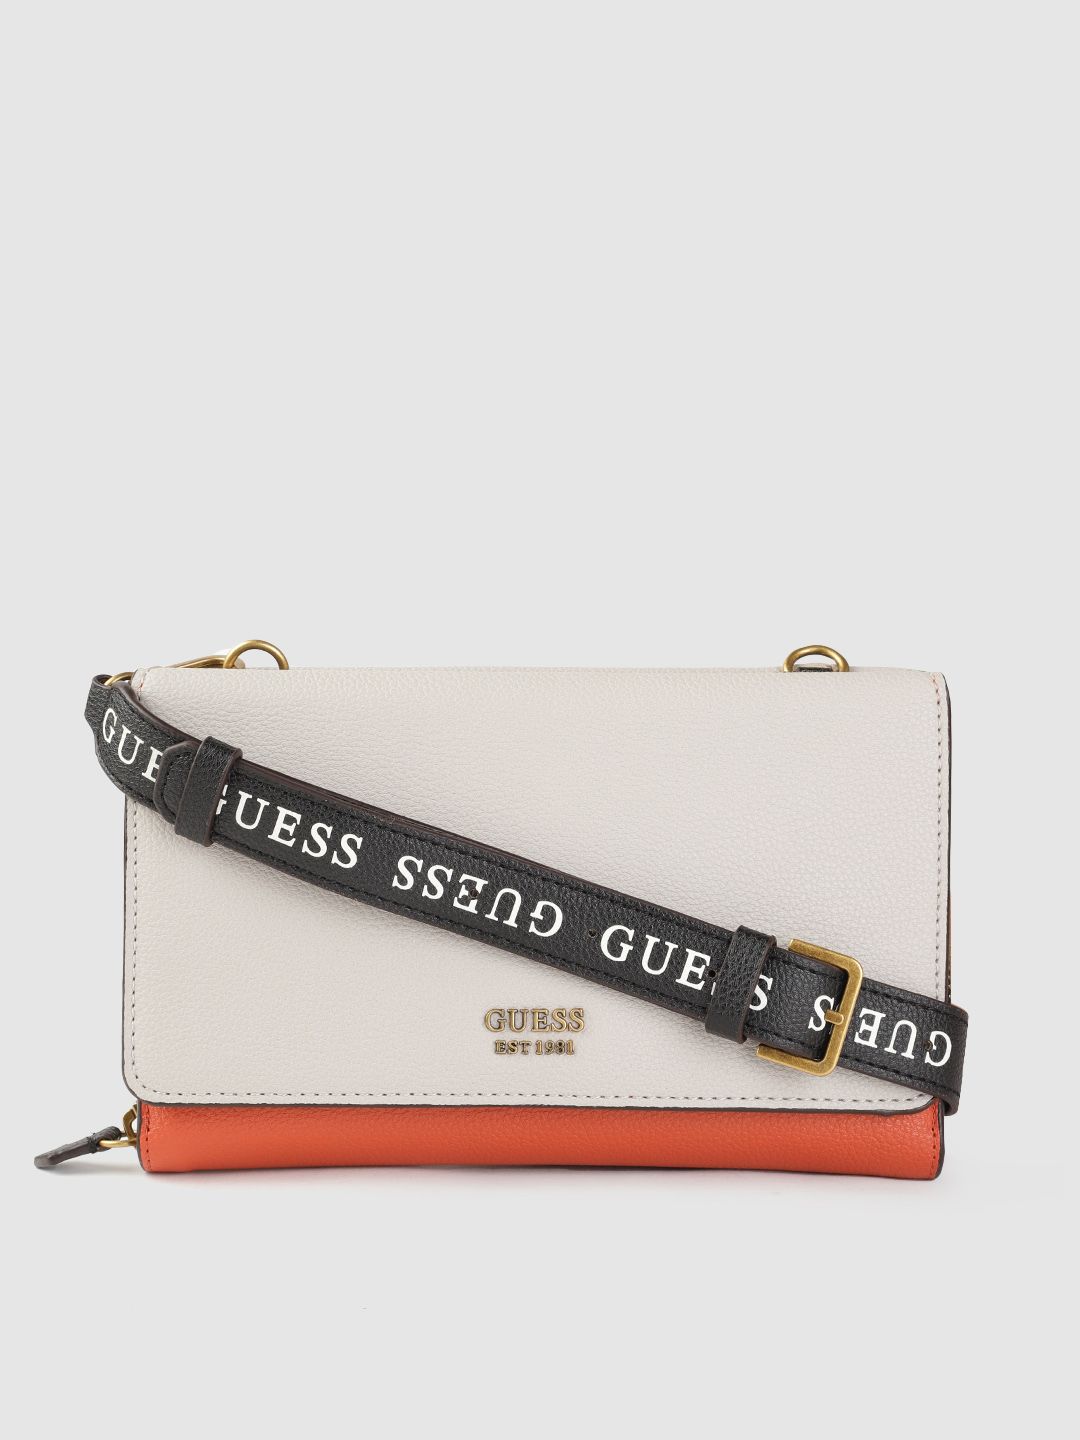 GUESS Off-White & Orange Structured Sling Bag Price in India